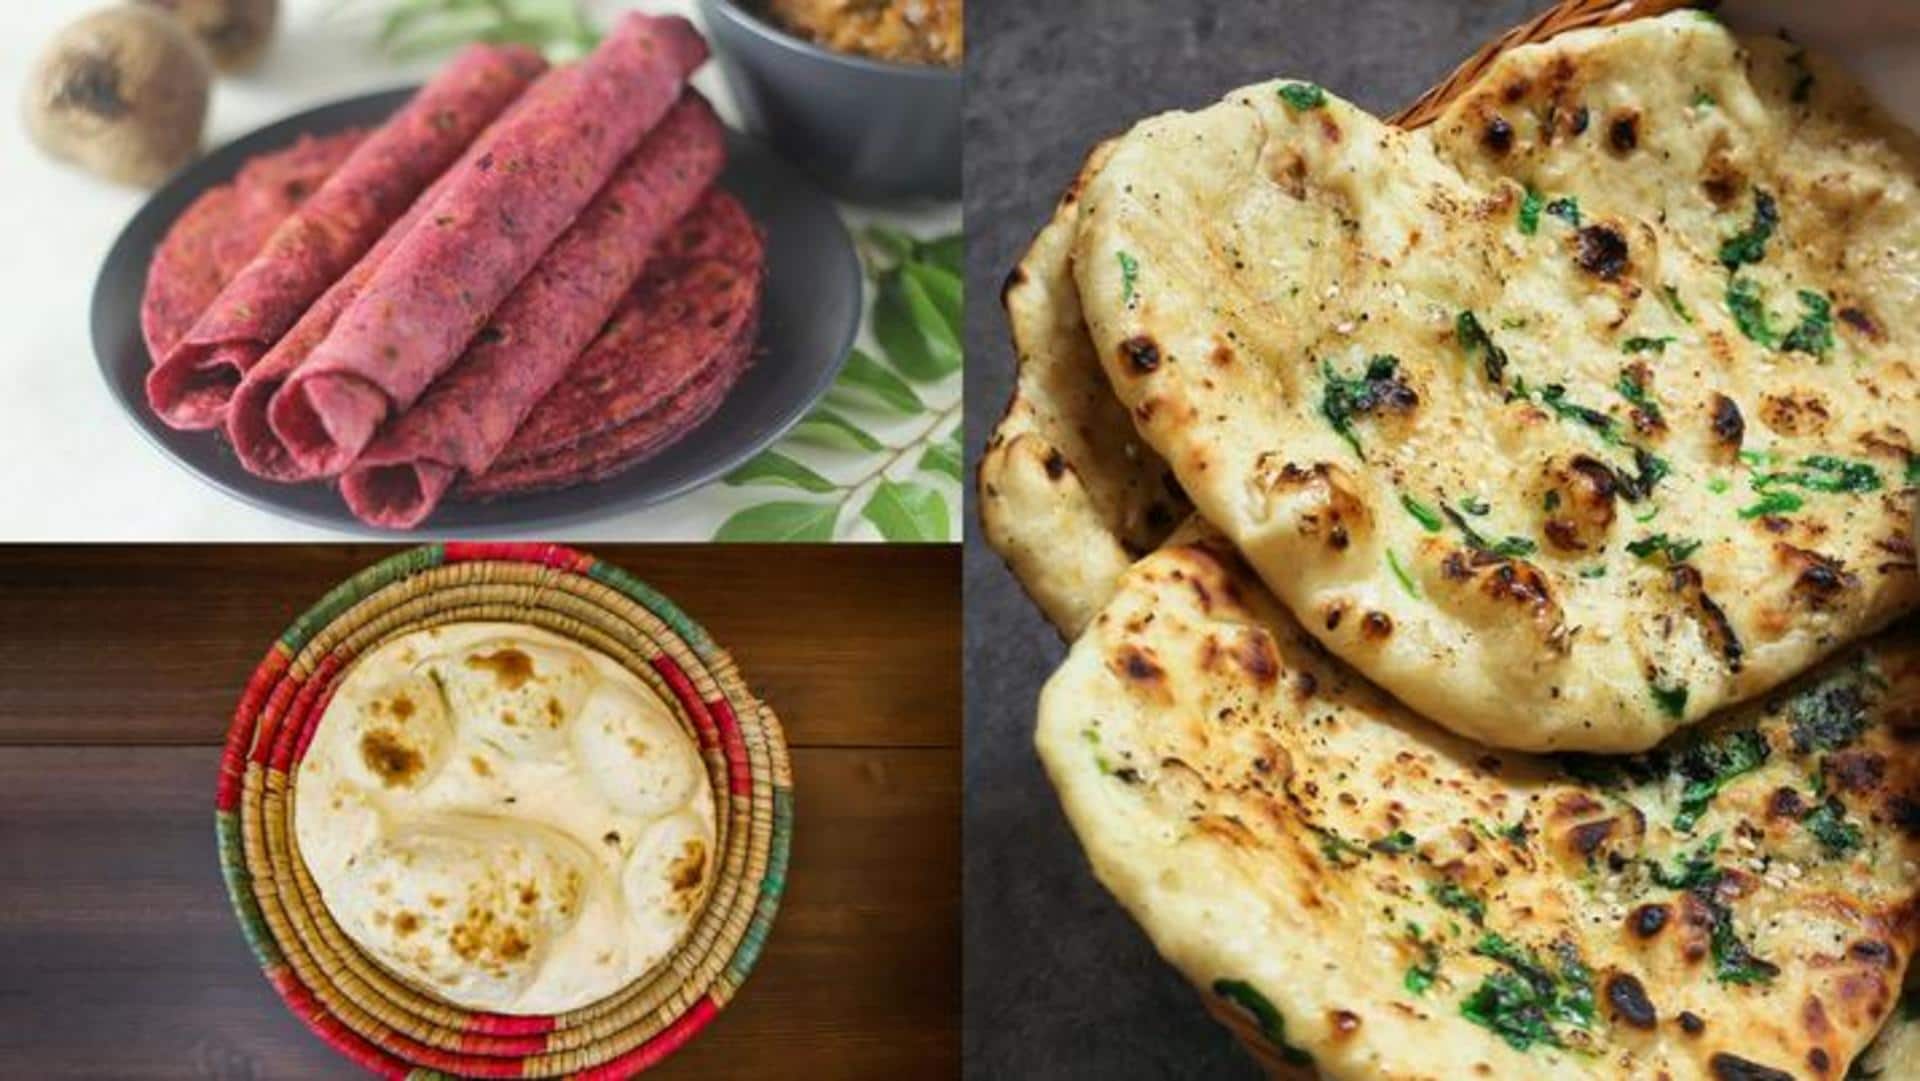 Bored of regular chapatis? Try these unique roti recipes